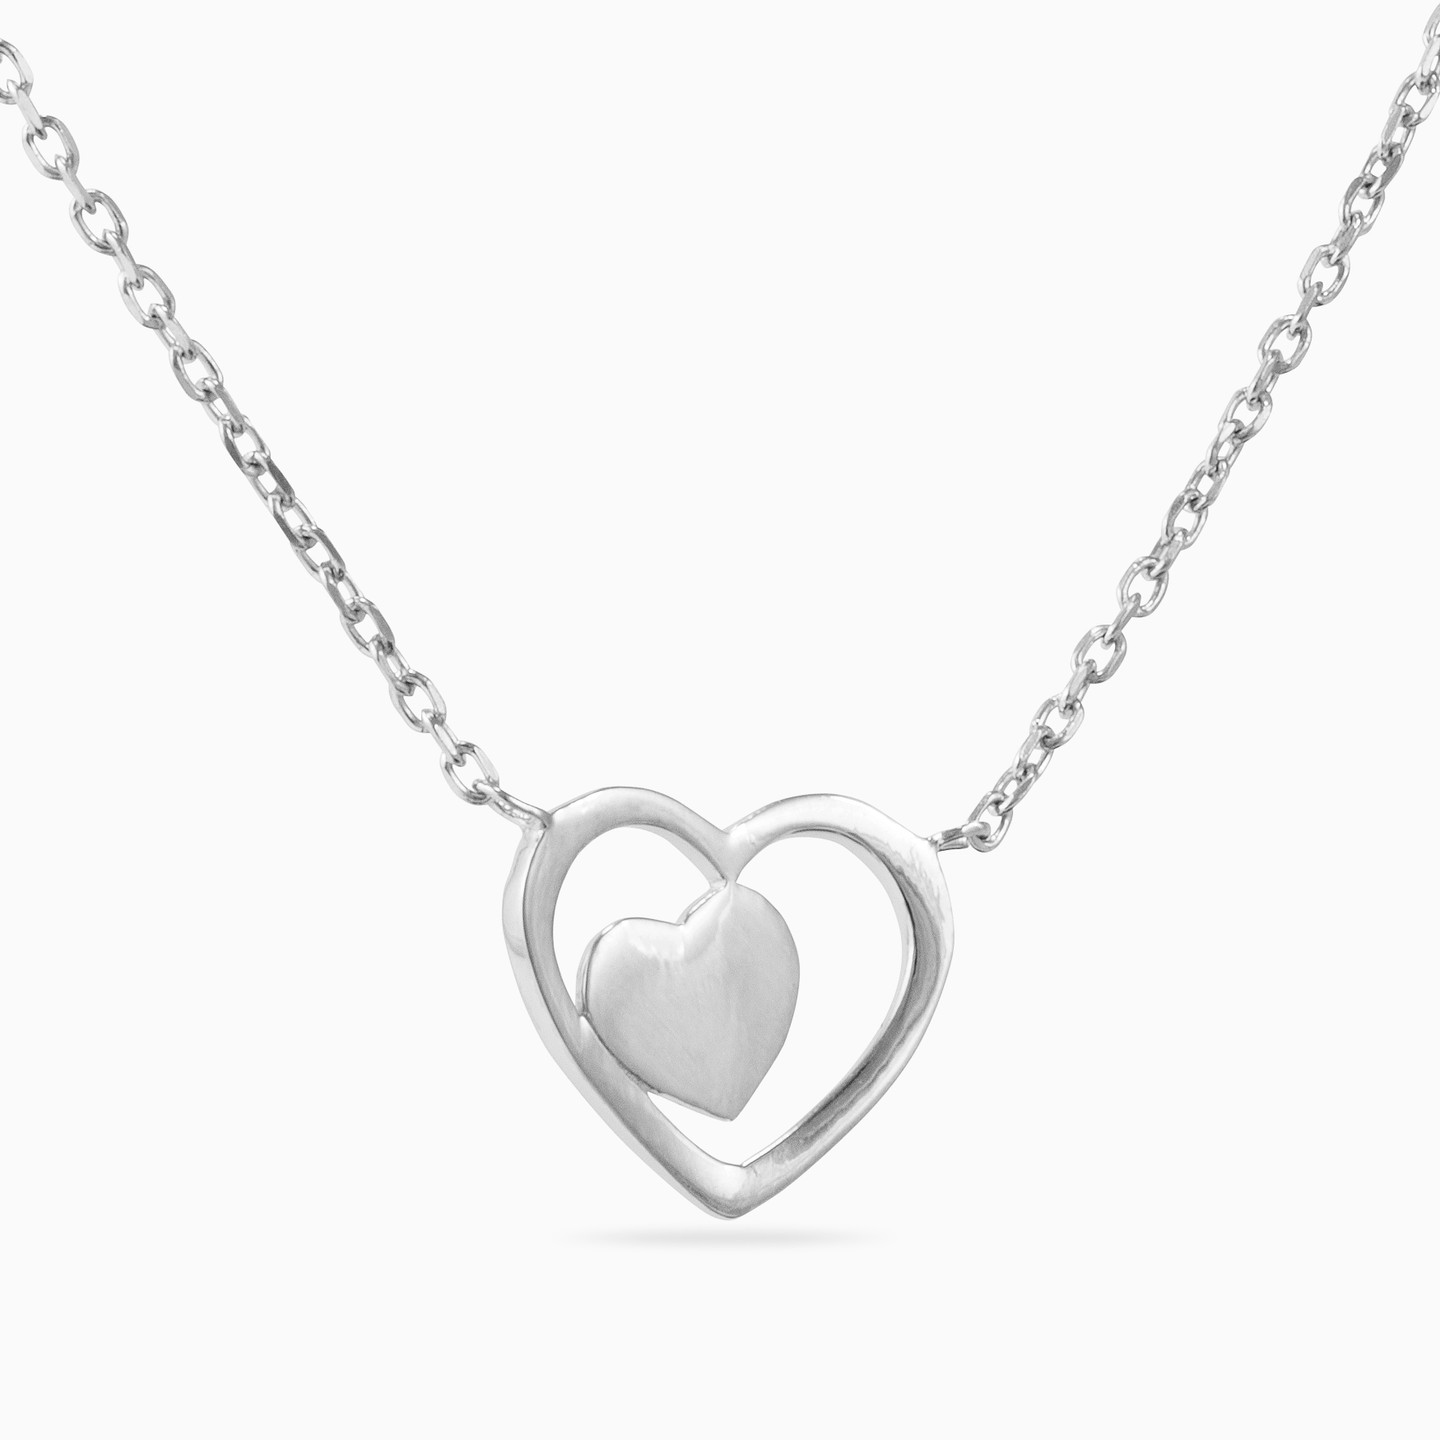 Sterling Silver Pendant Necklace - 2